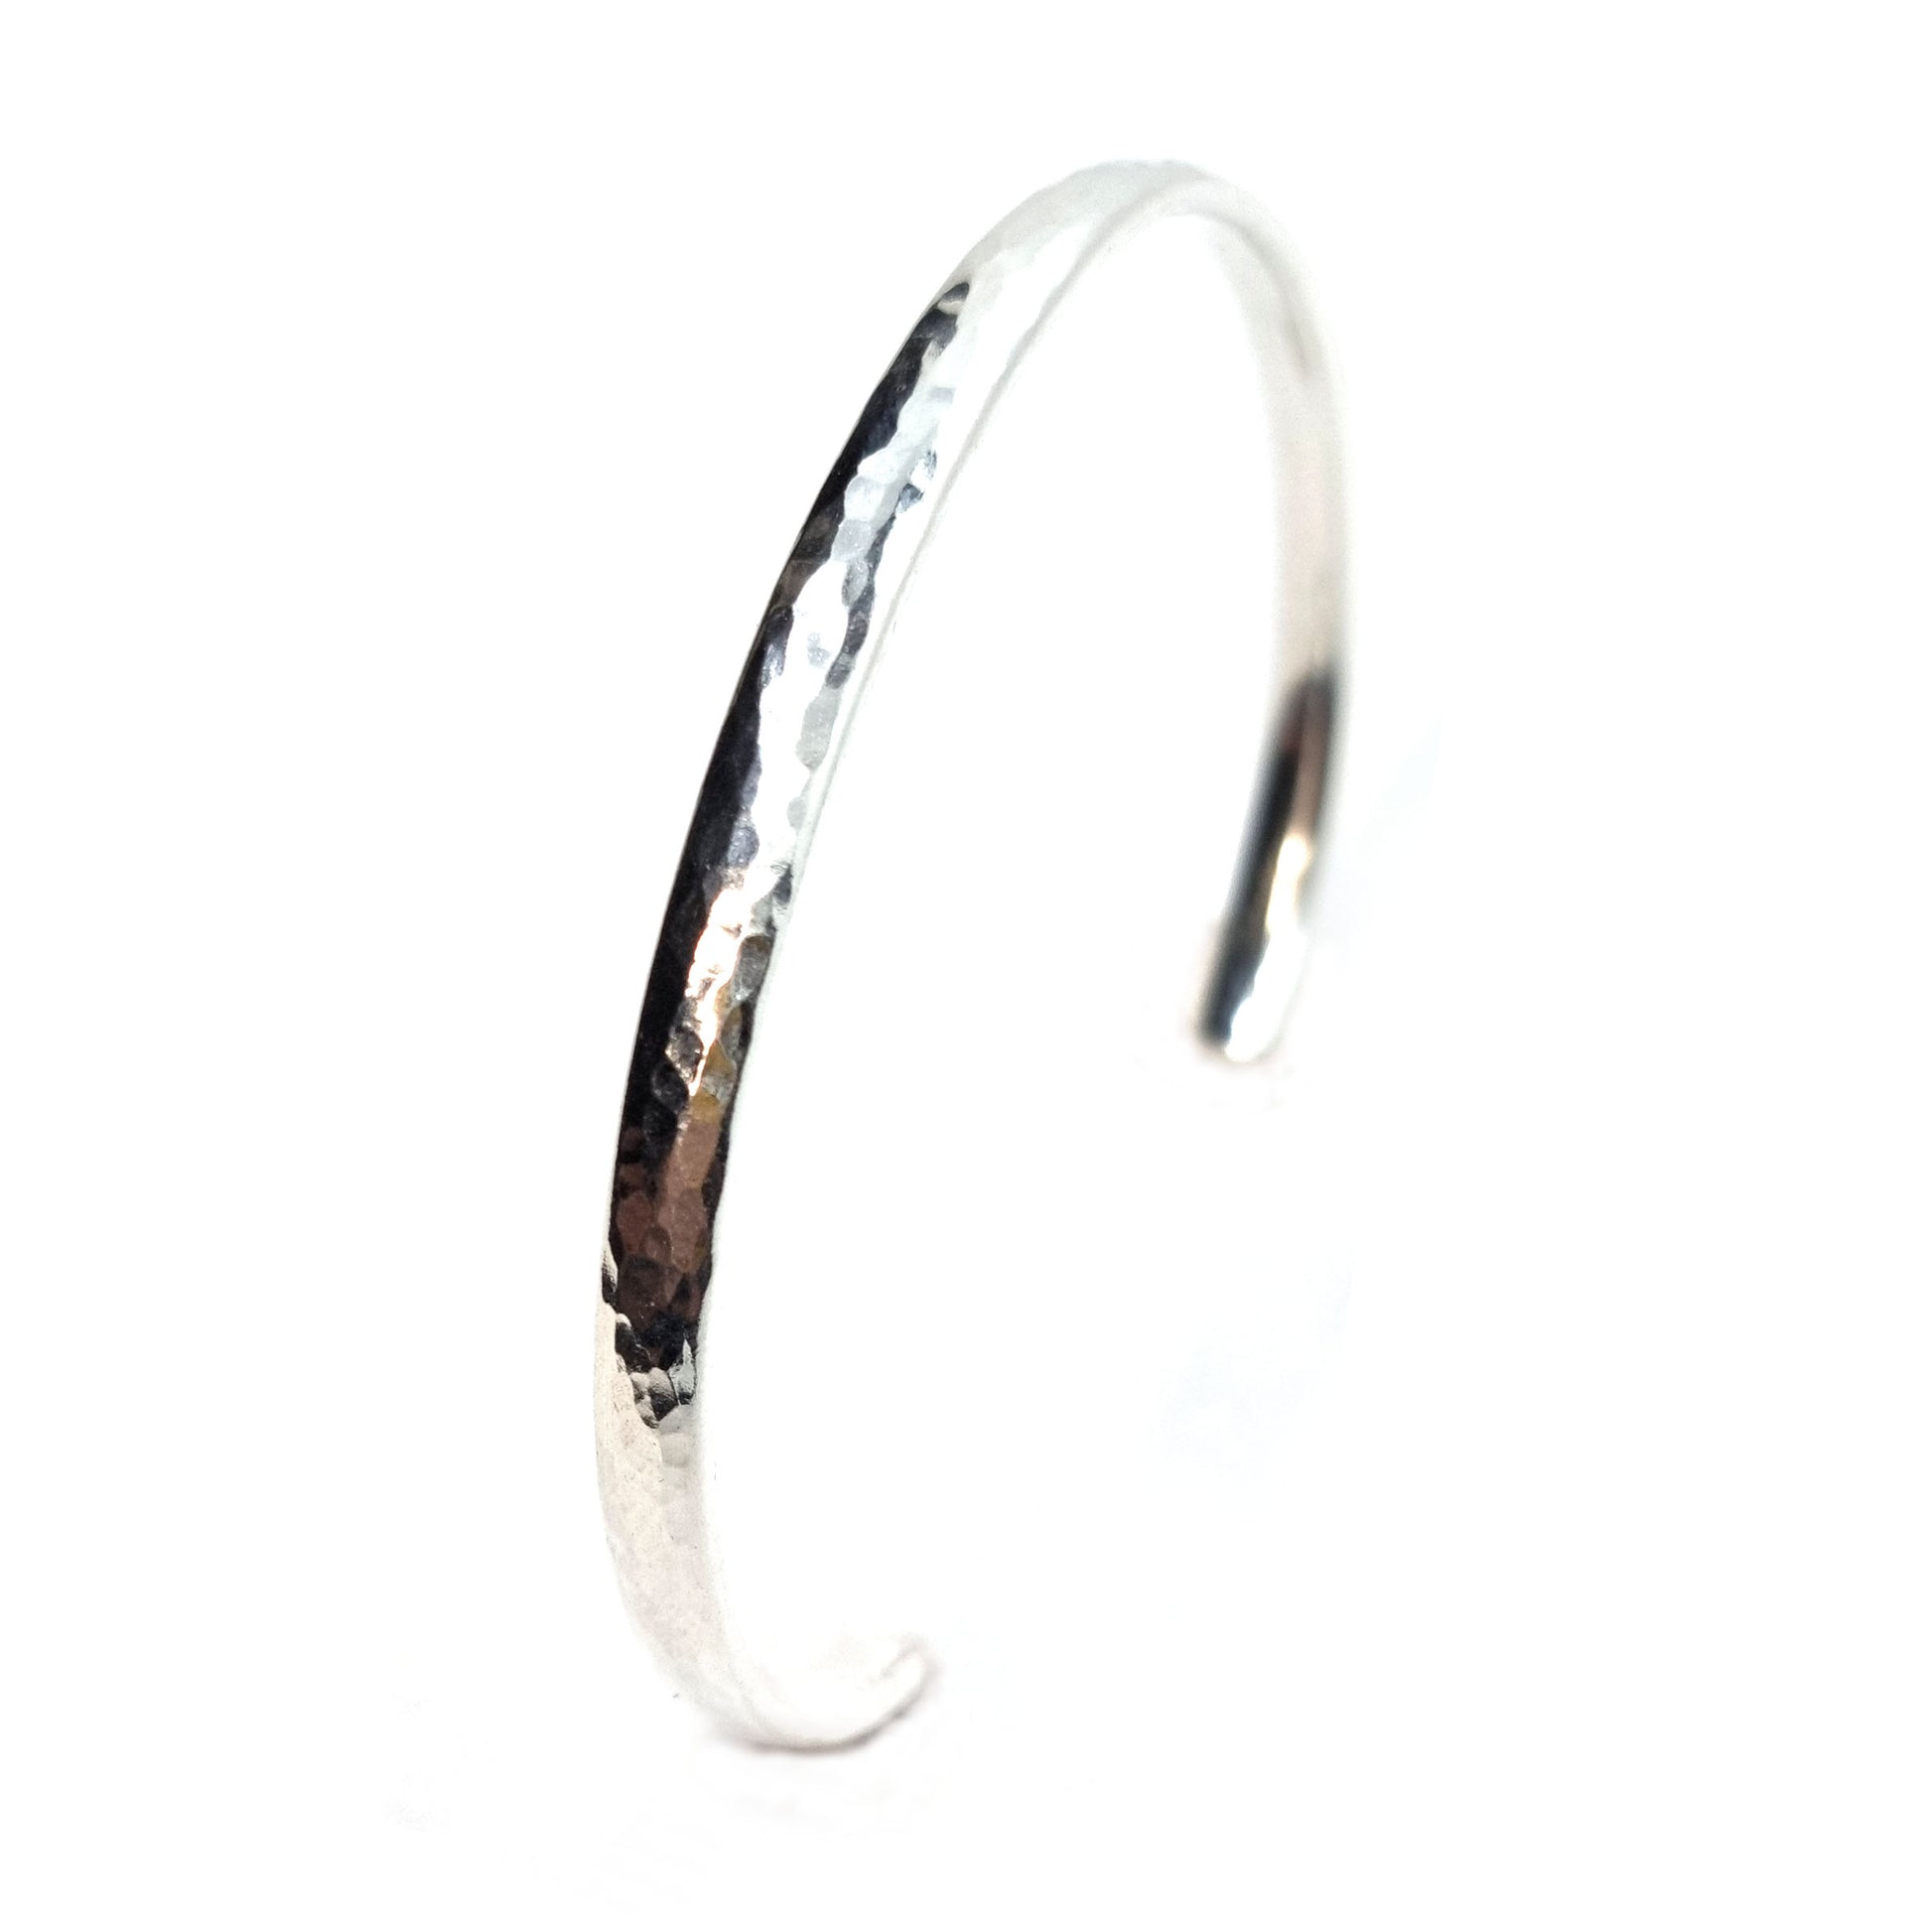 Silver hammered open torque bangle.